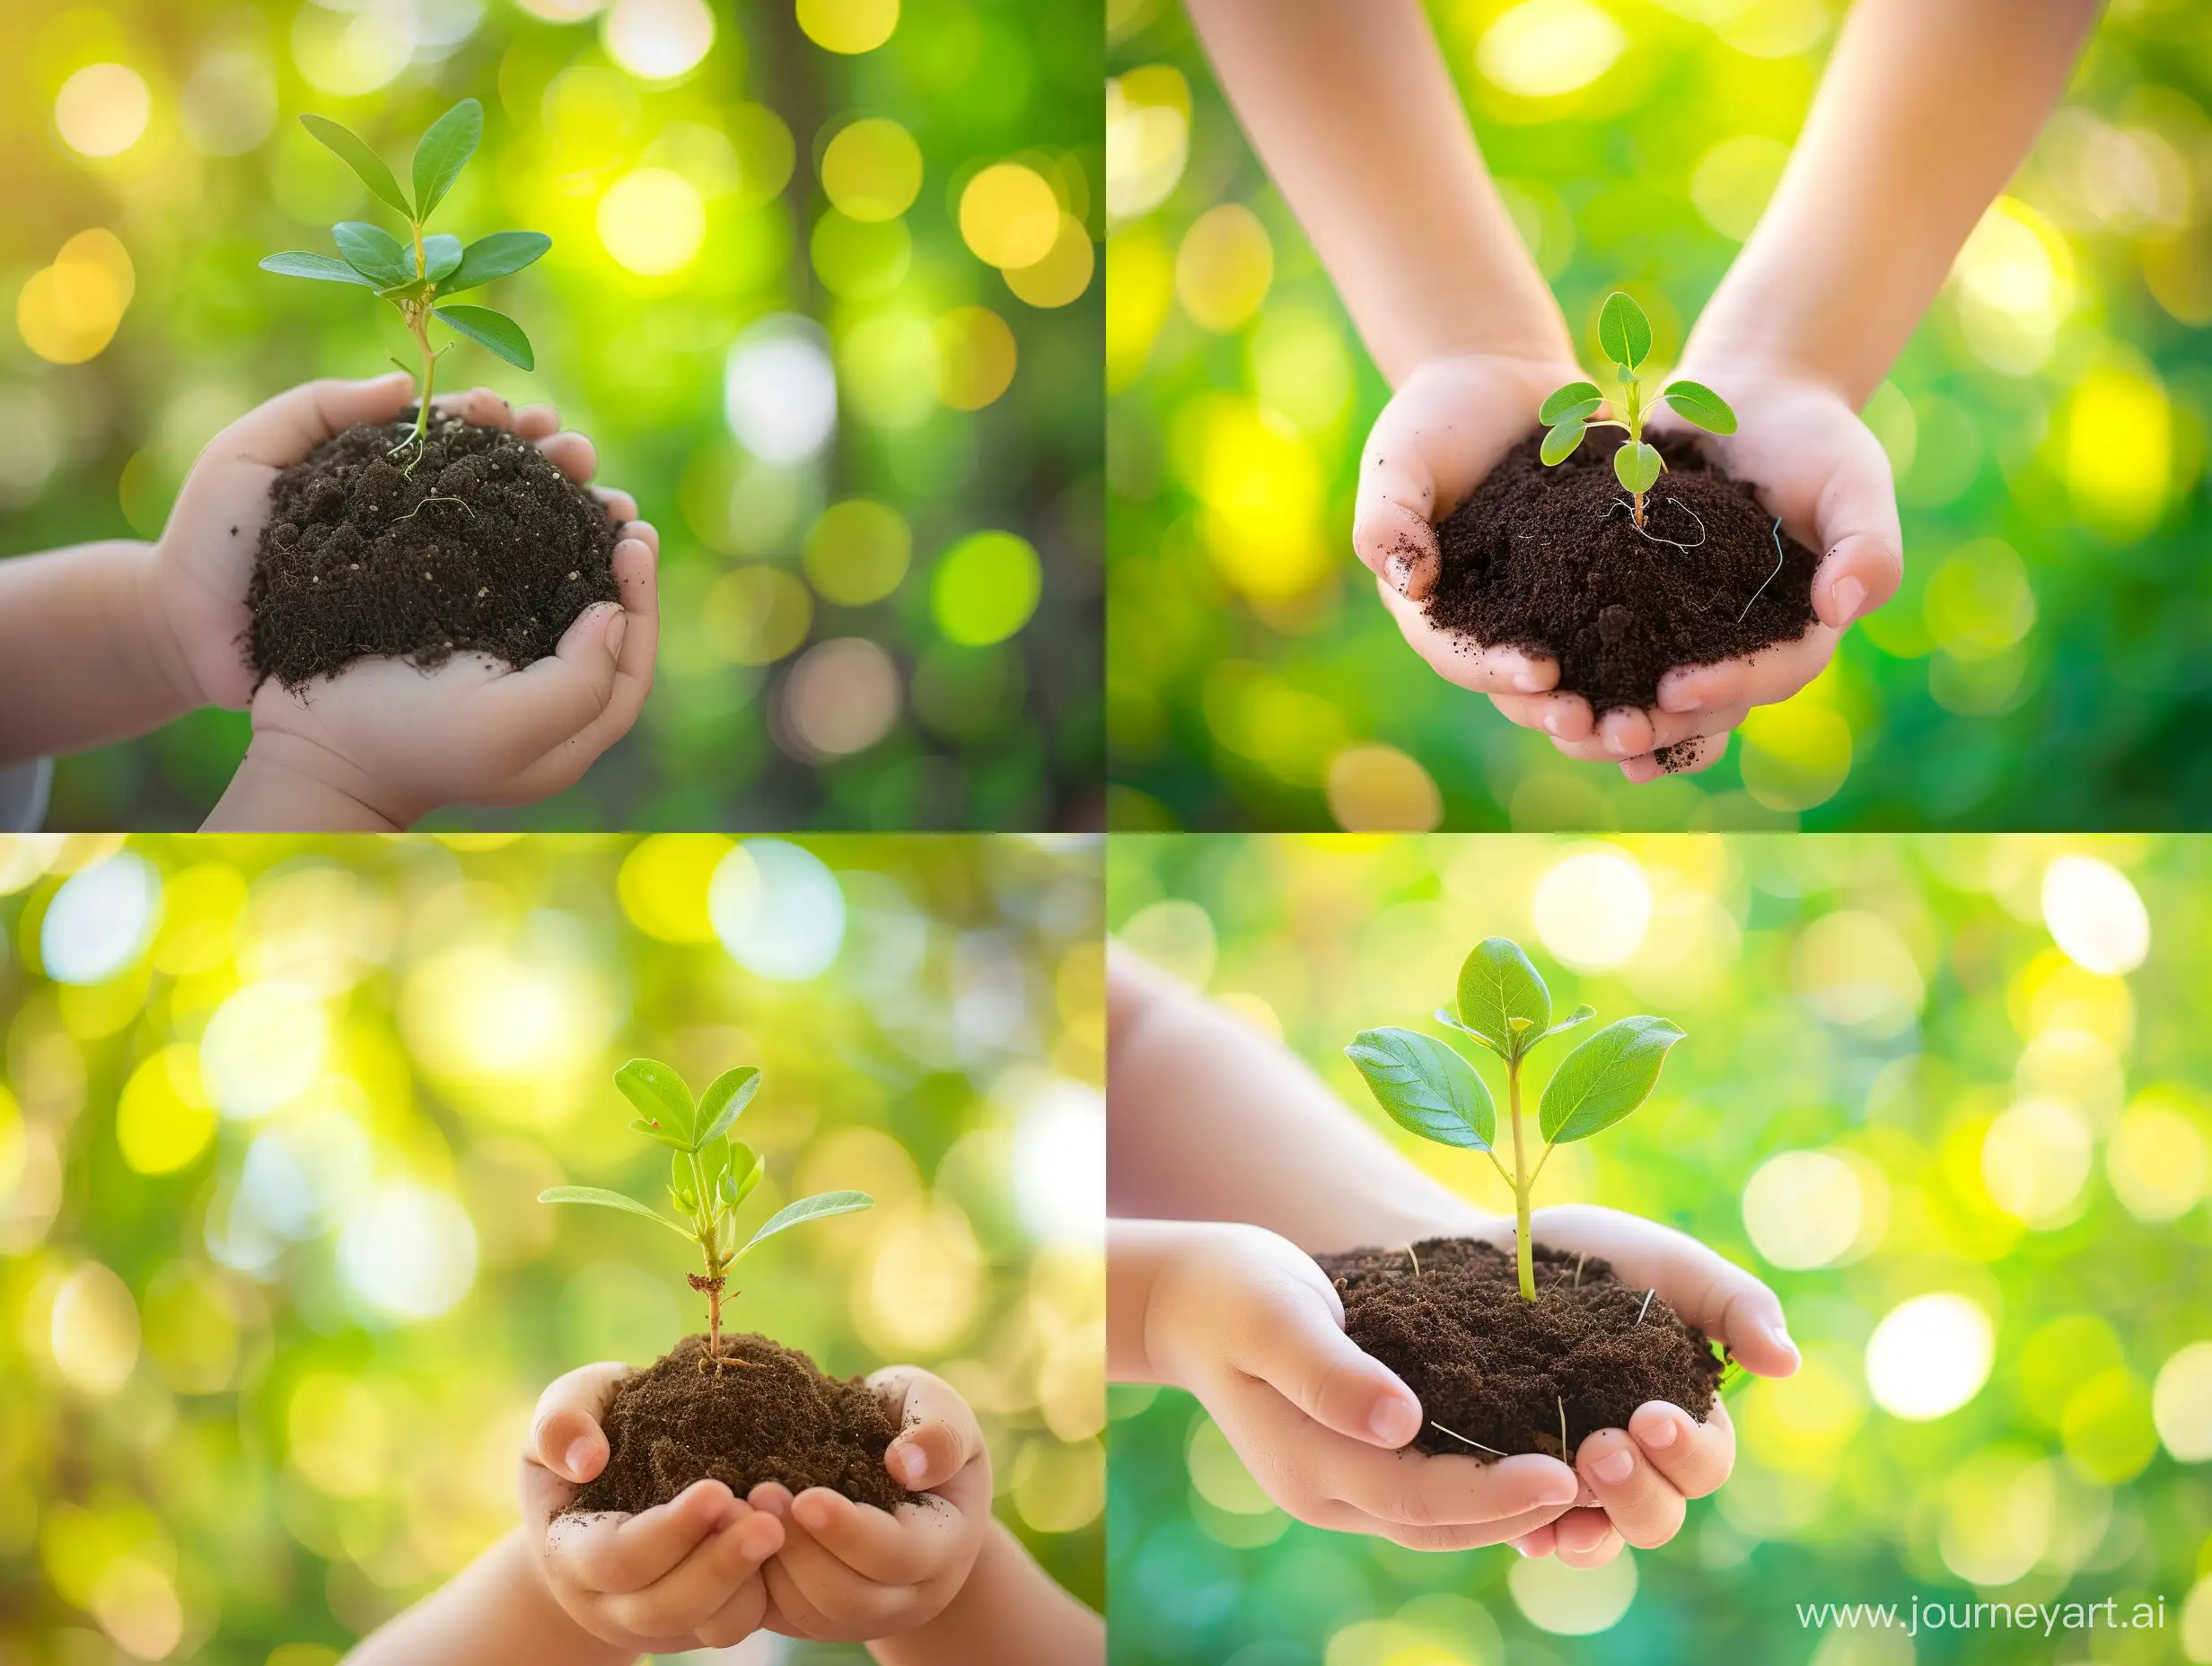 The child holds in his hands a handful of earth in which a sprout or seedling grows against background of beautiful green and yellow bokeh. Environmental protection.